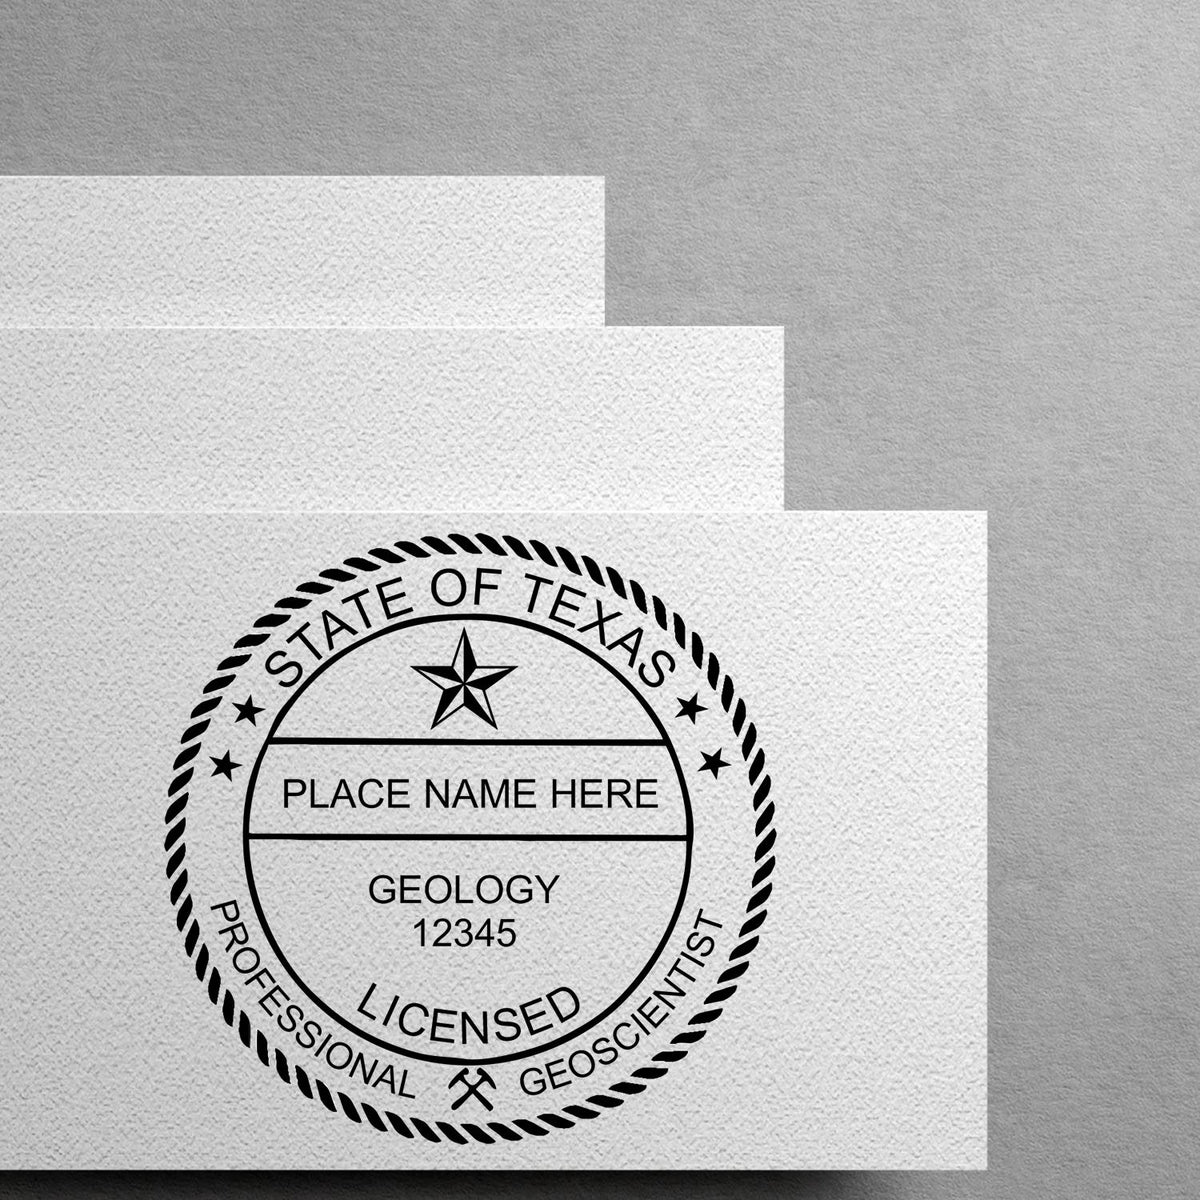 A stamped imprint of the Digital Texas Geologist Stamp, Electronic Seal for Texas Geologist in this stylish lifestyle photo, setting the tone for a unique and personalized product.